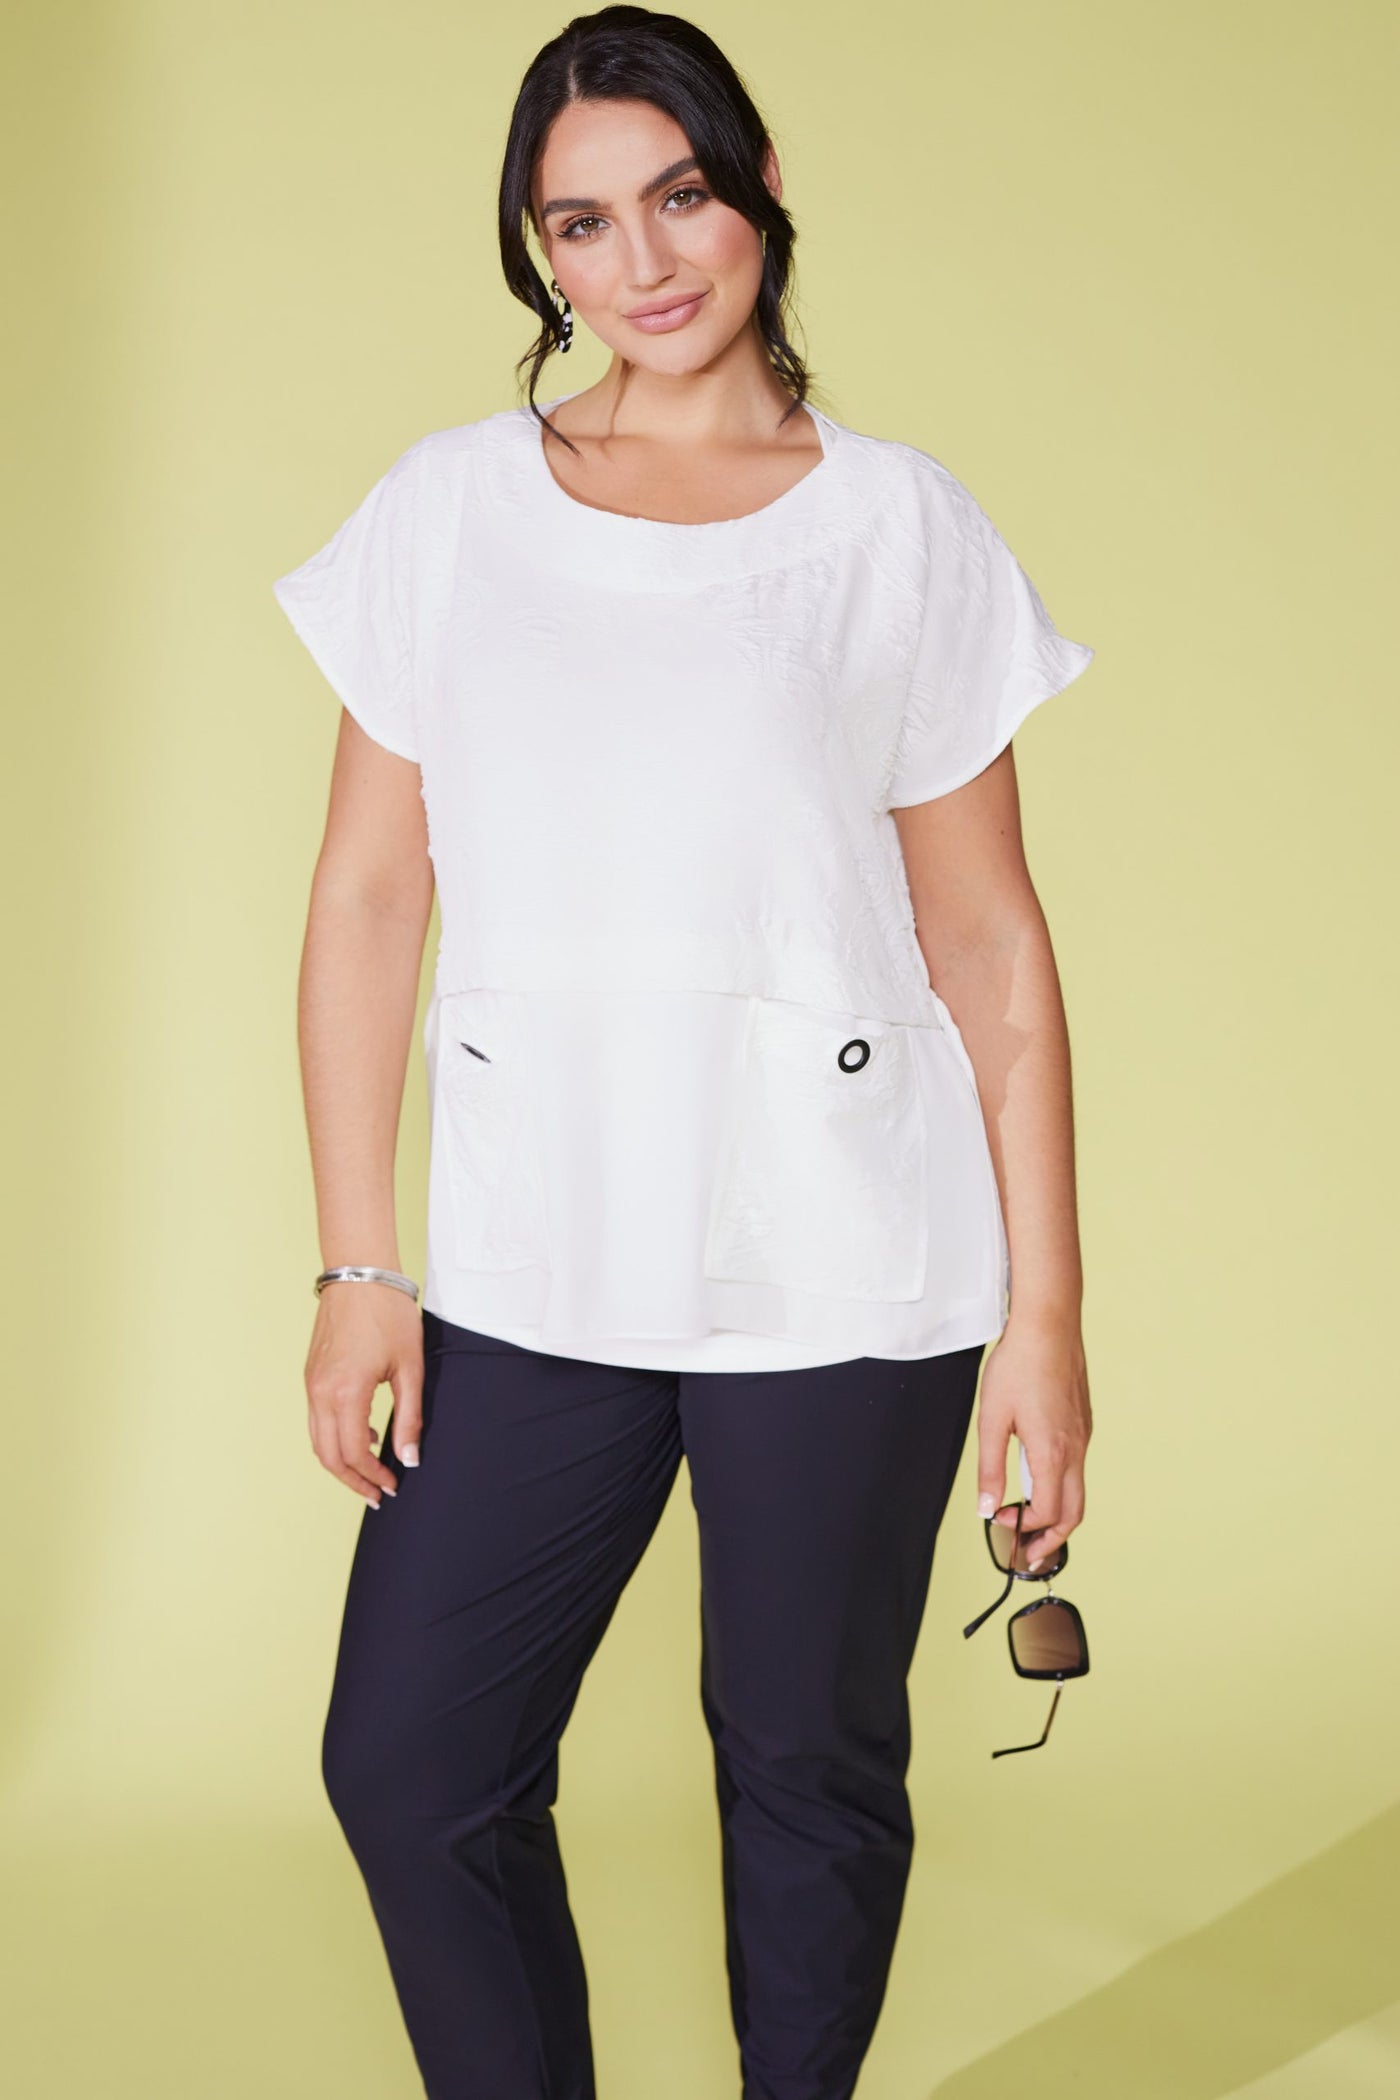 Cream Embossed Top With Pockets